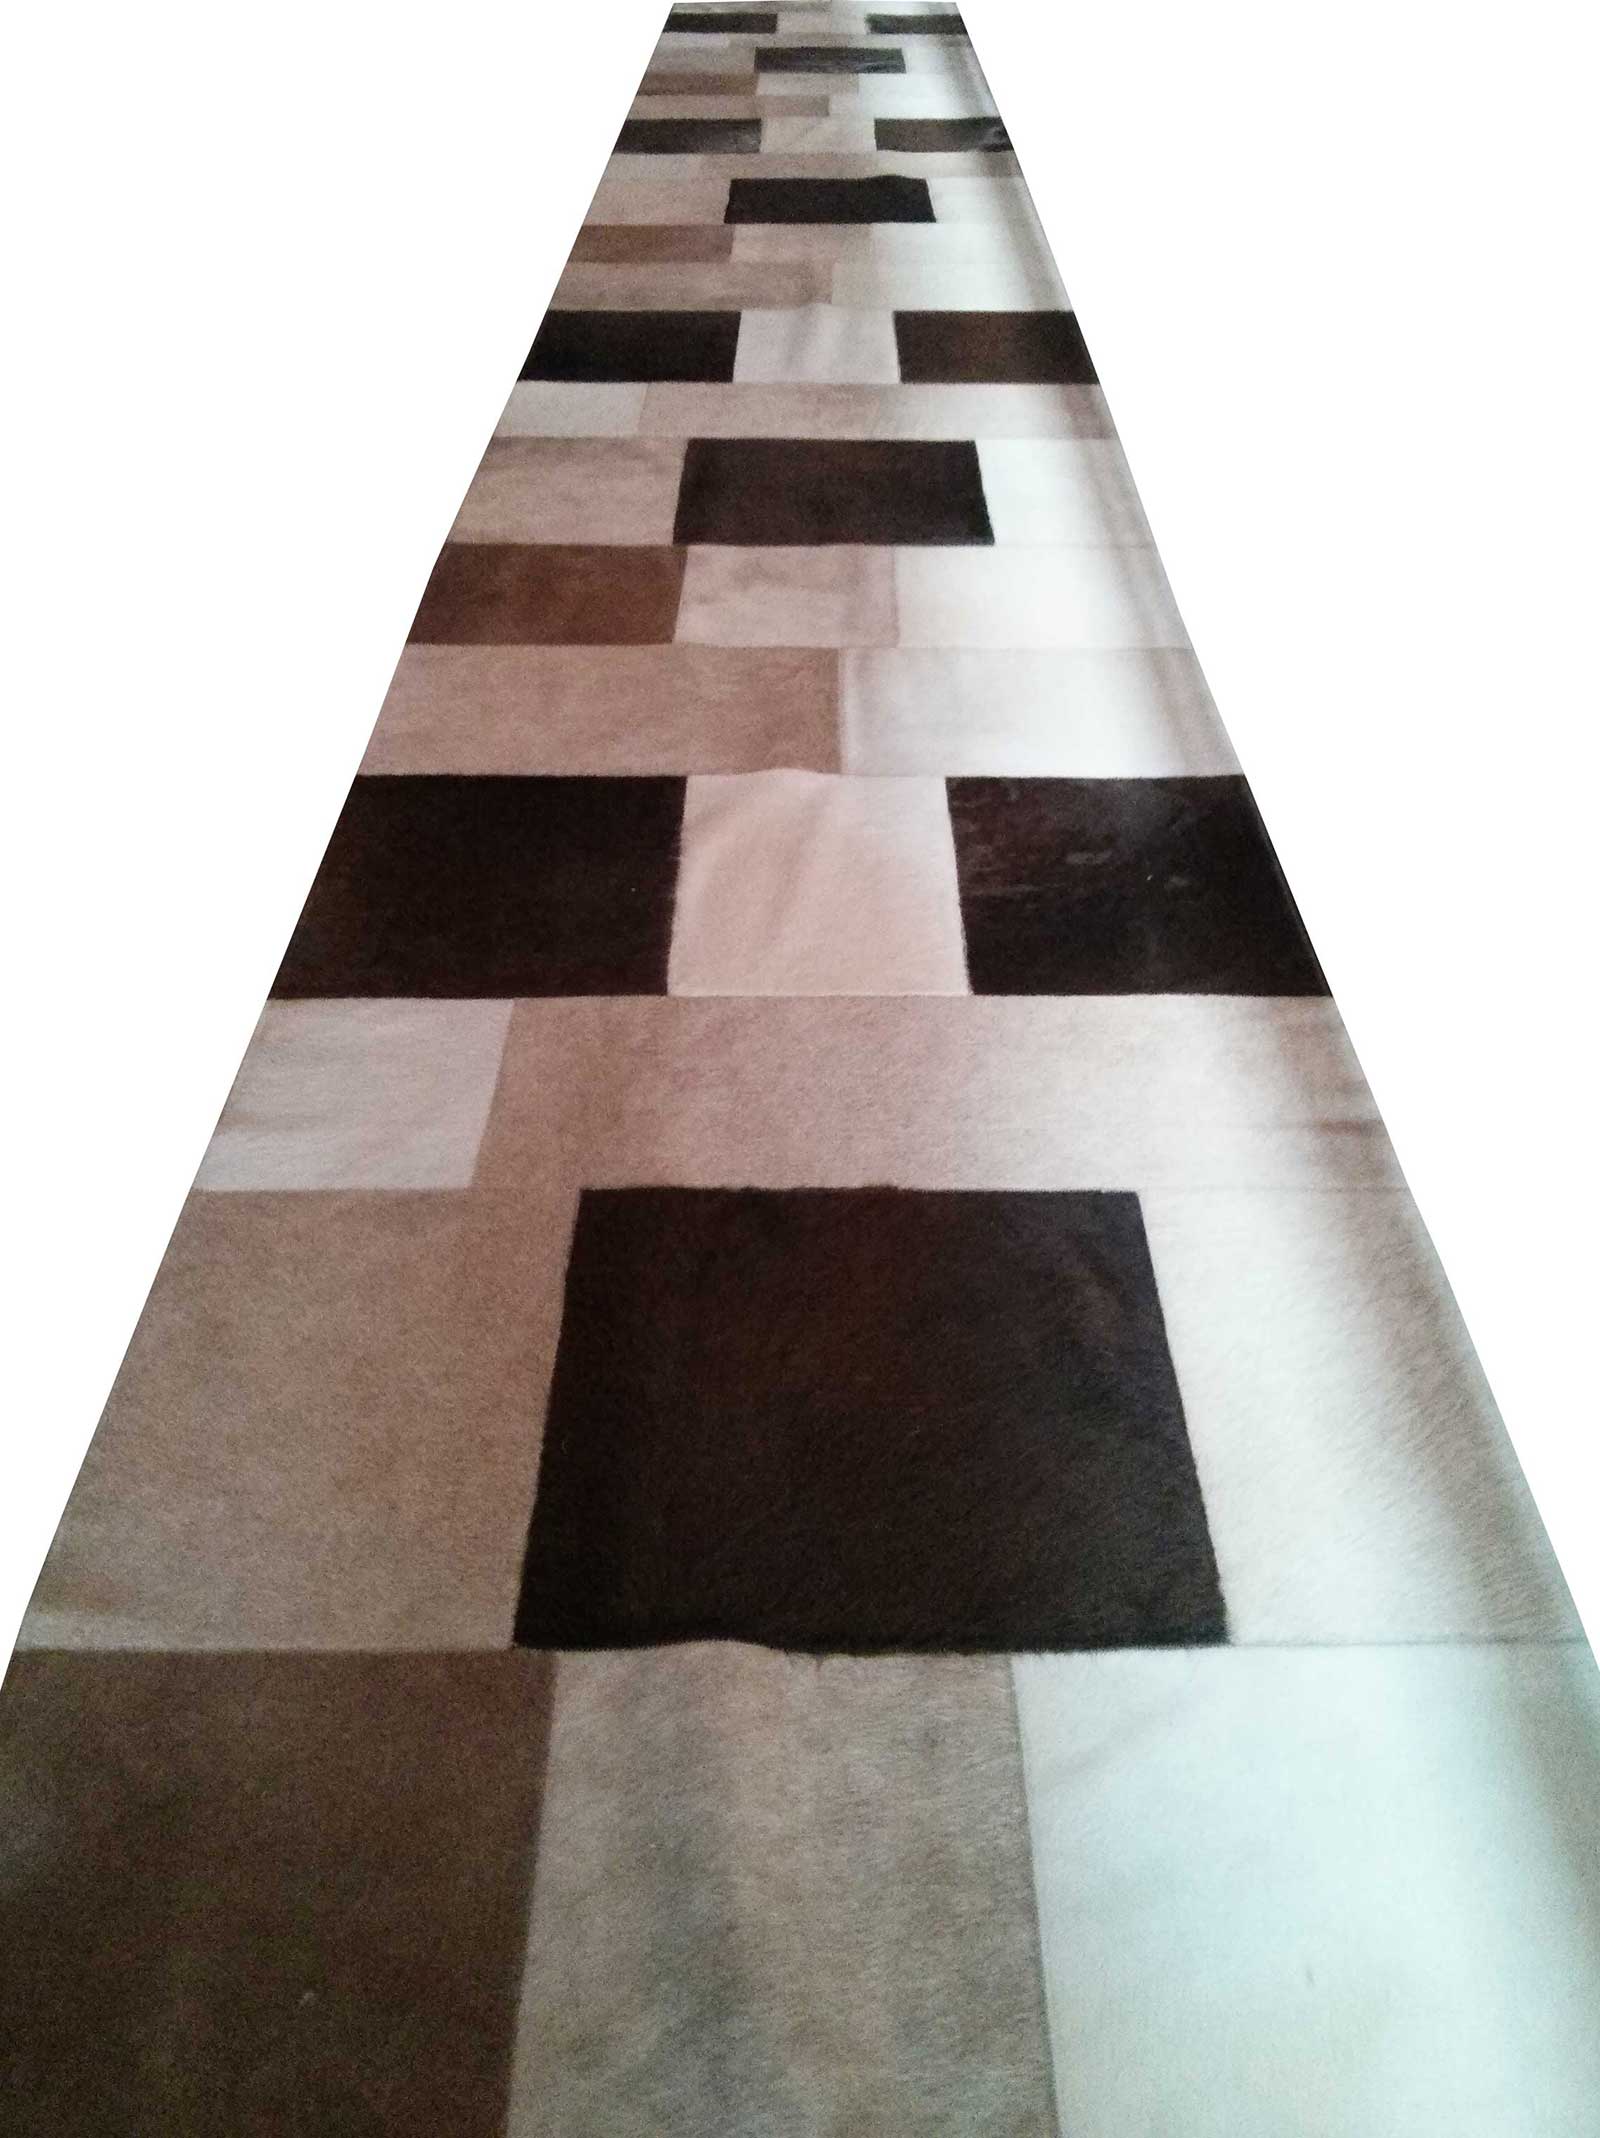 Custom Patchwork Cowhide Runner entirely handmade at Shine Rug's factory